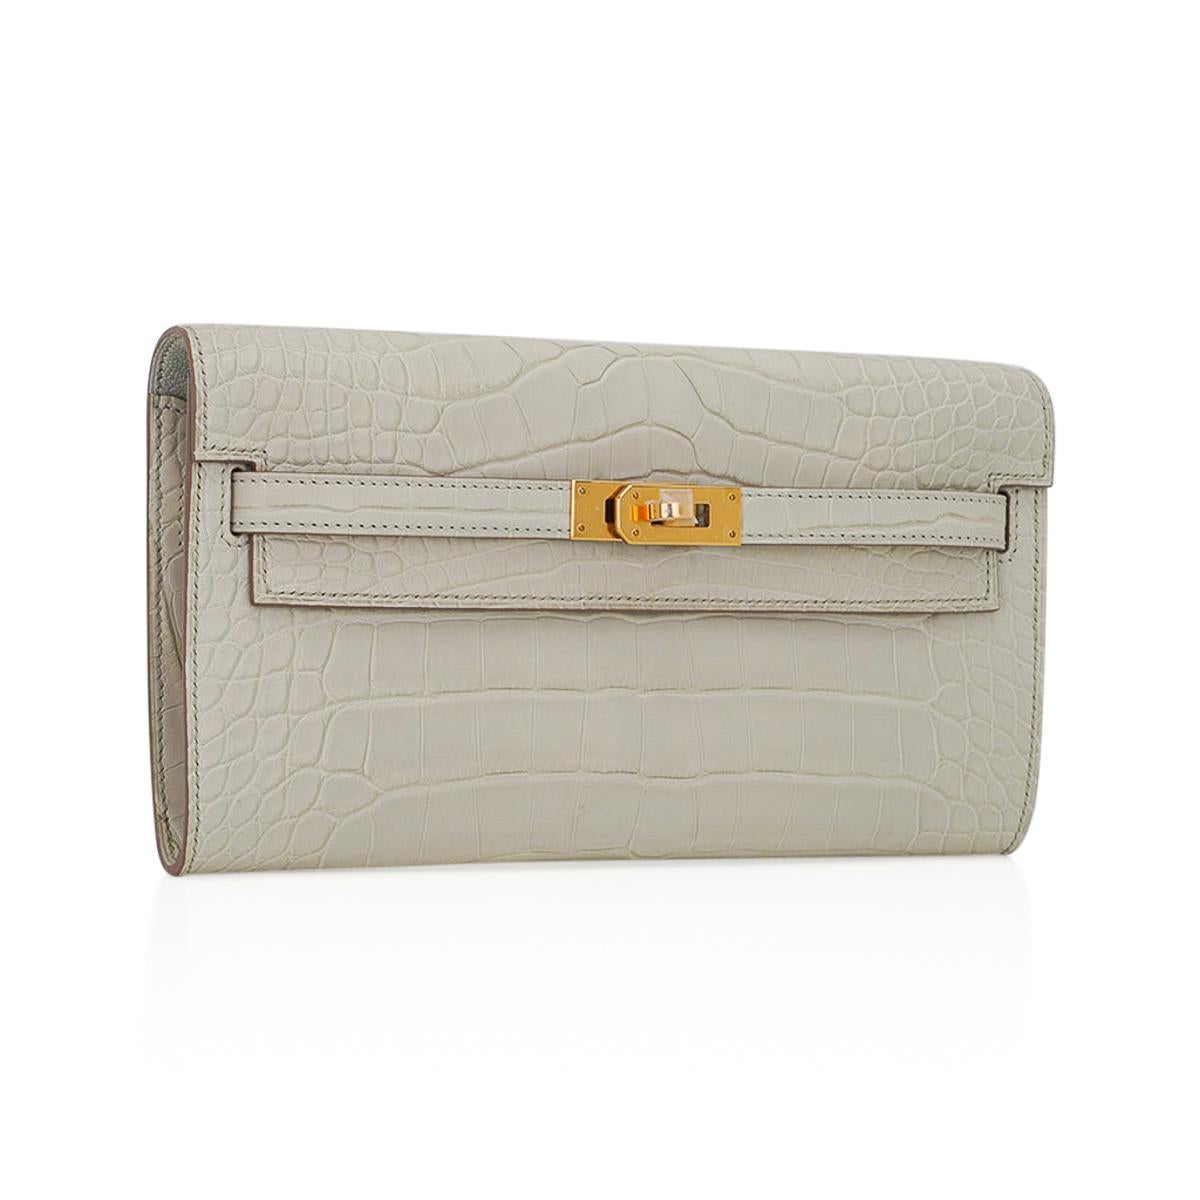 Mightychic offers an Hermes Kelly Classique To Go wallet featured in neutral Beton Matte Alligator
Rich Gold hardware accentuates this exquisite limited edition Hermes Beton Alligator crossbody Kelly bag.
Removable shoulder strap changes from a